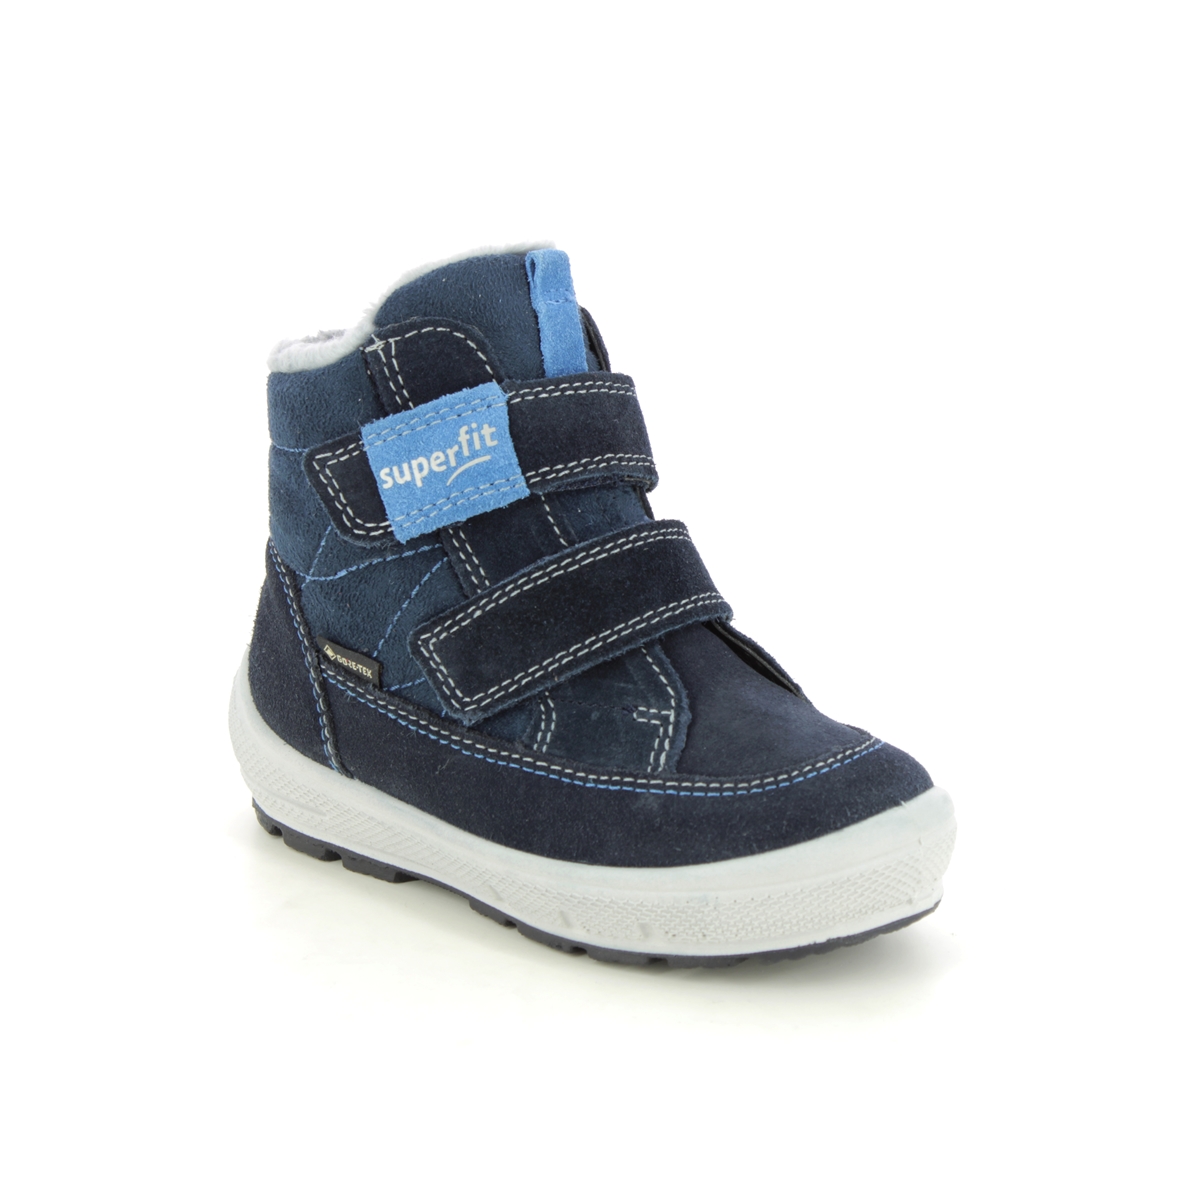 Superfit Groovy Gtx Navy Kids Toddler Boys Boots 1009314-8000 In Size 23 In Plain Navy